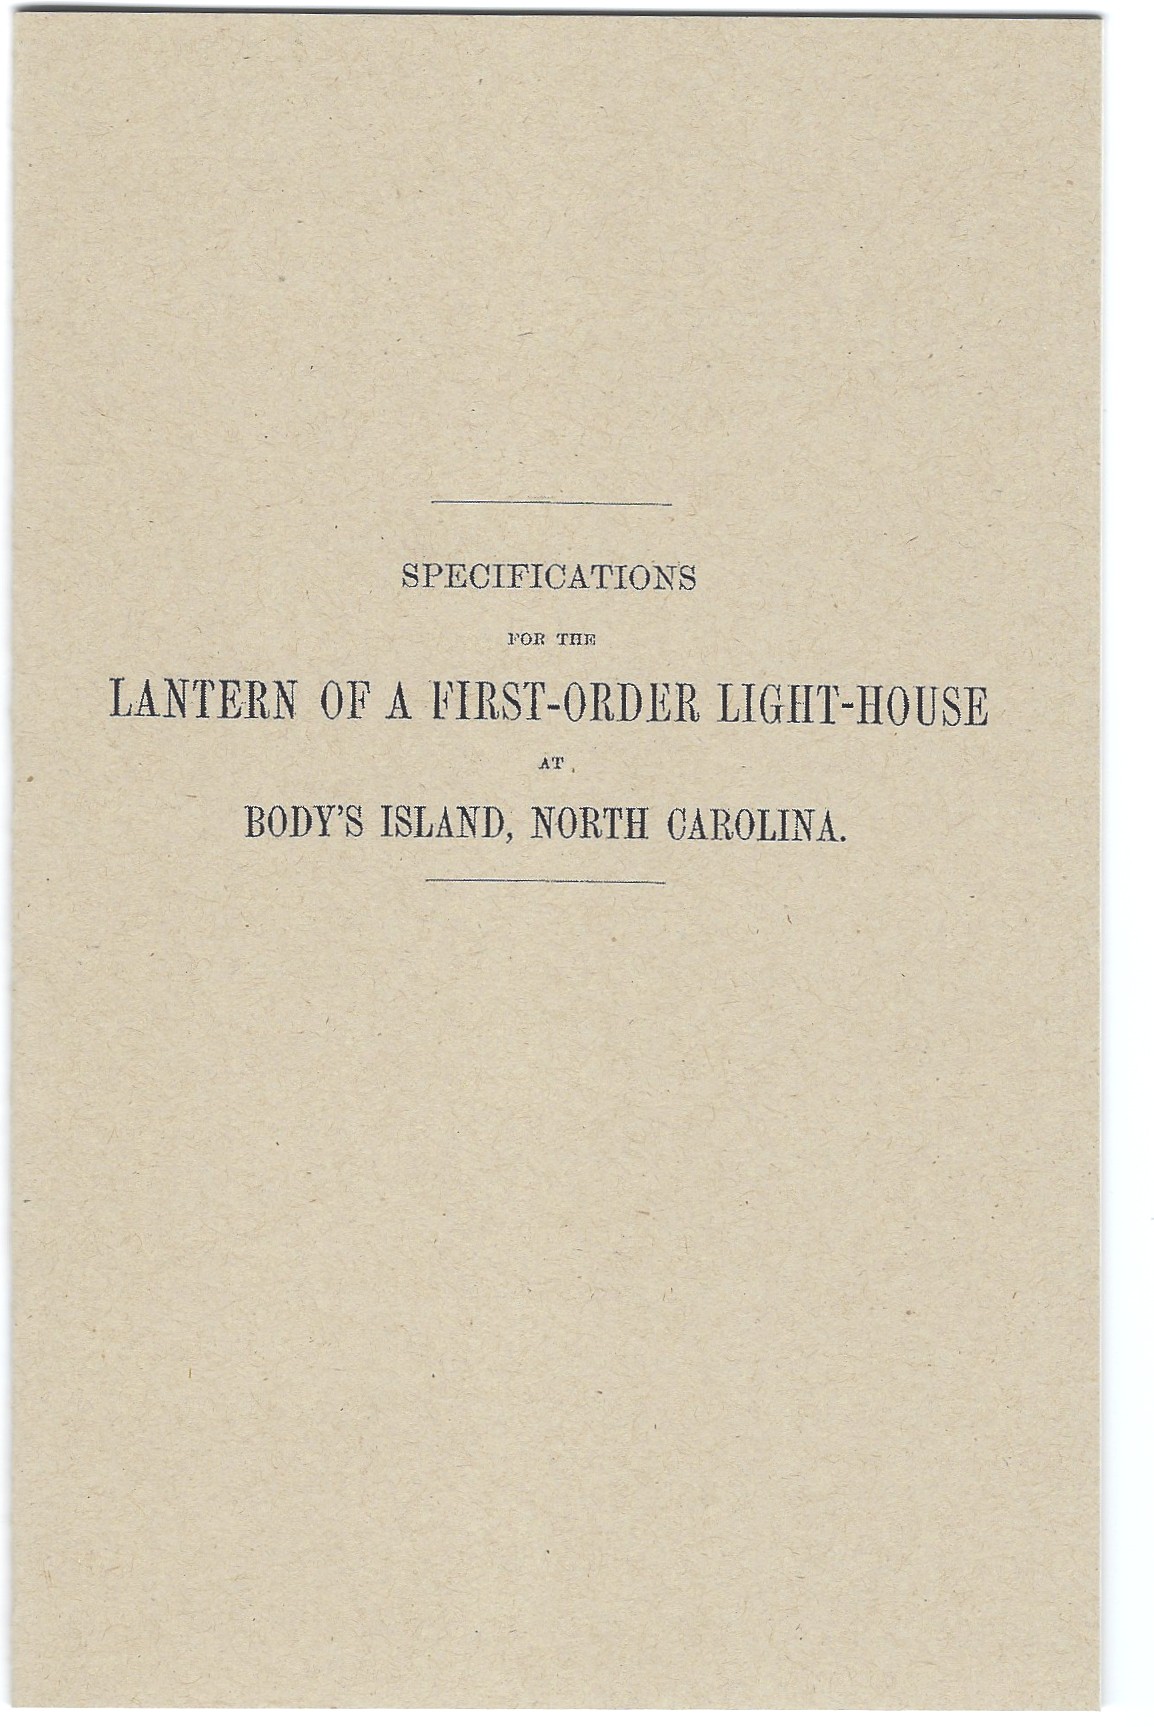 Specifications for the Lantern of a First-Order Light-House